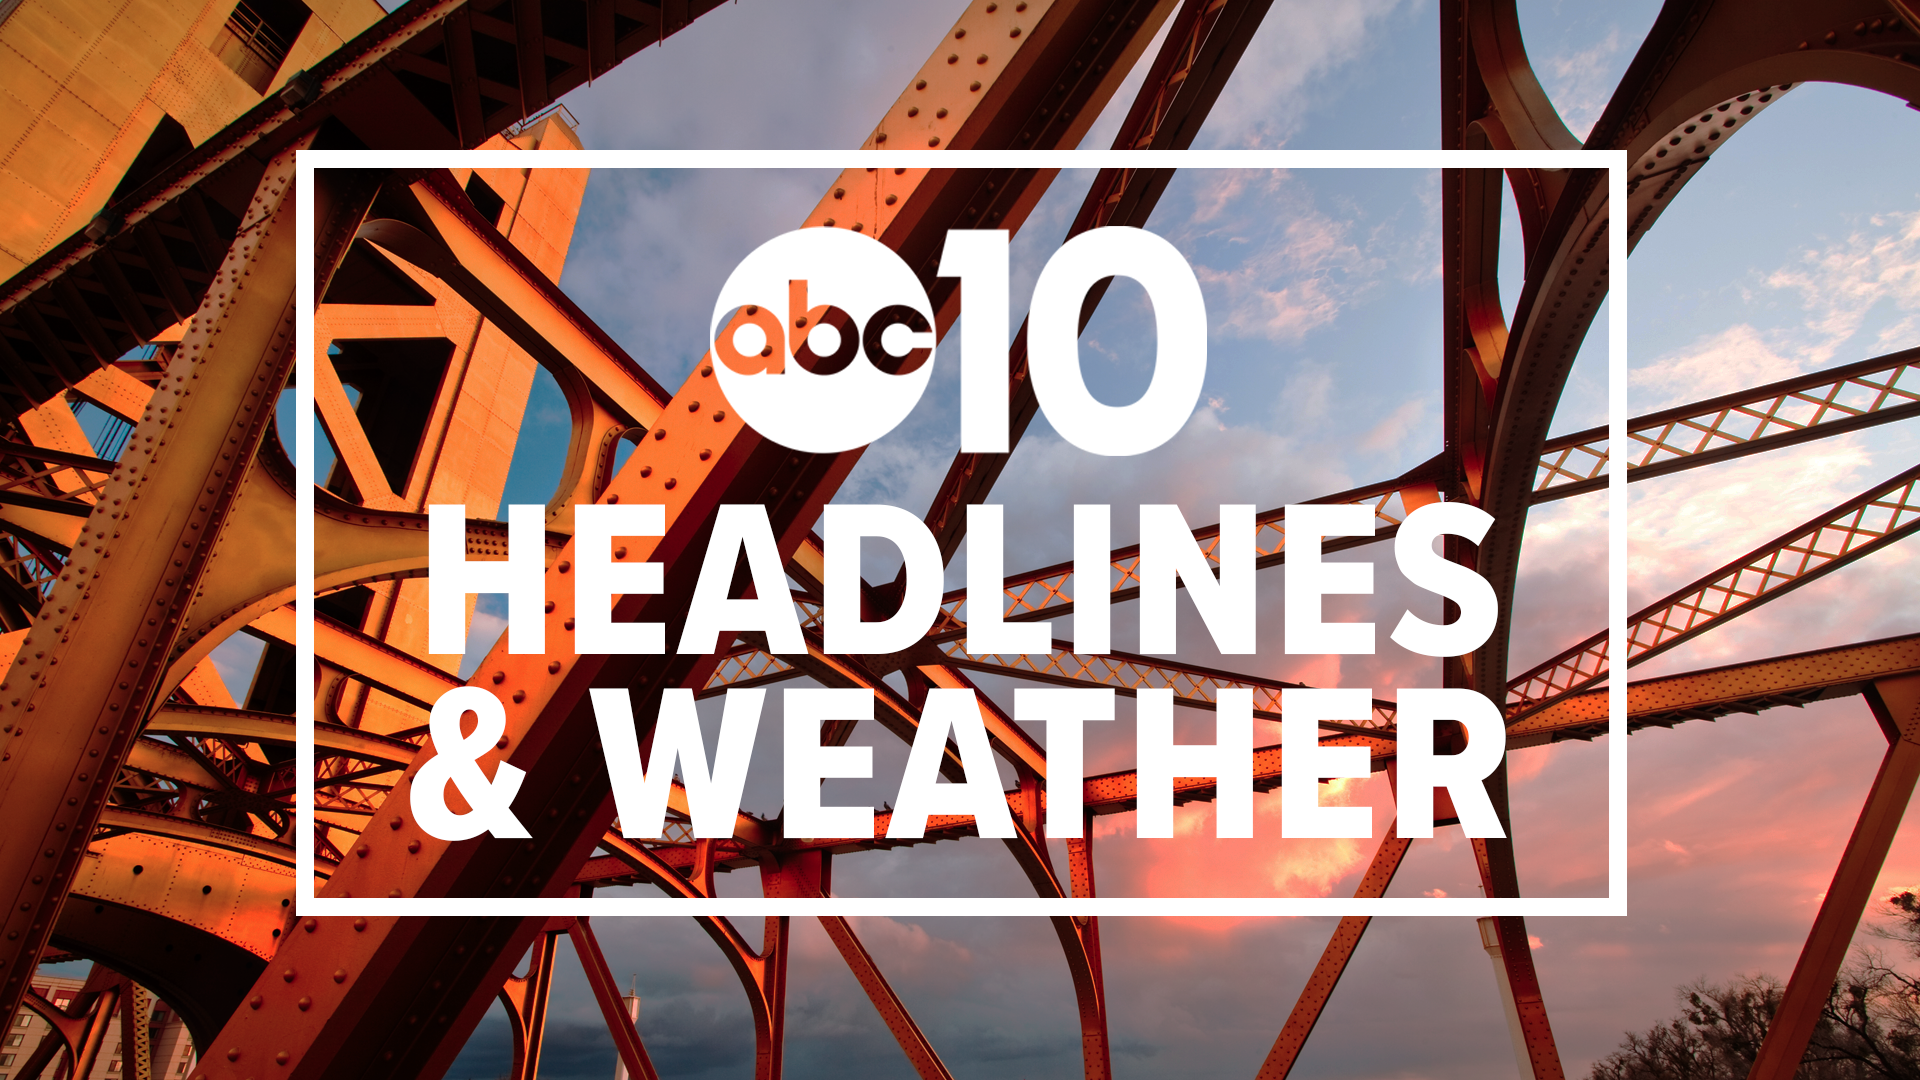 Evening Headlines: Sept. 2, 2019 | Catch in-depth reporting on #LateNewsTonight at 11 p.m. | The latest Sacramento news is always at www.abc10.com.